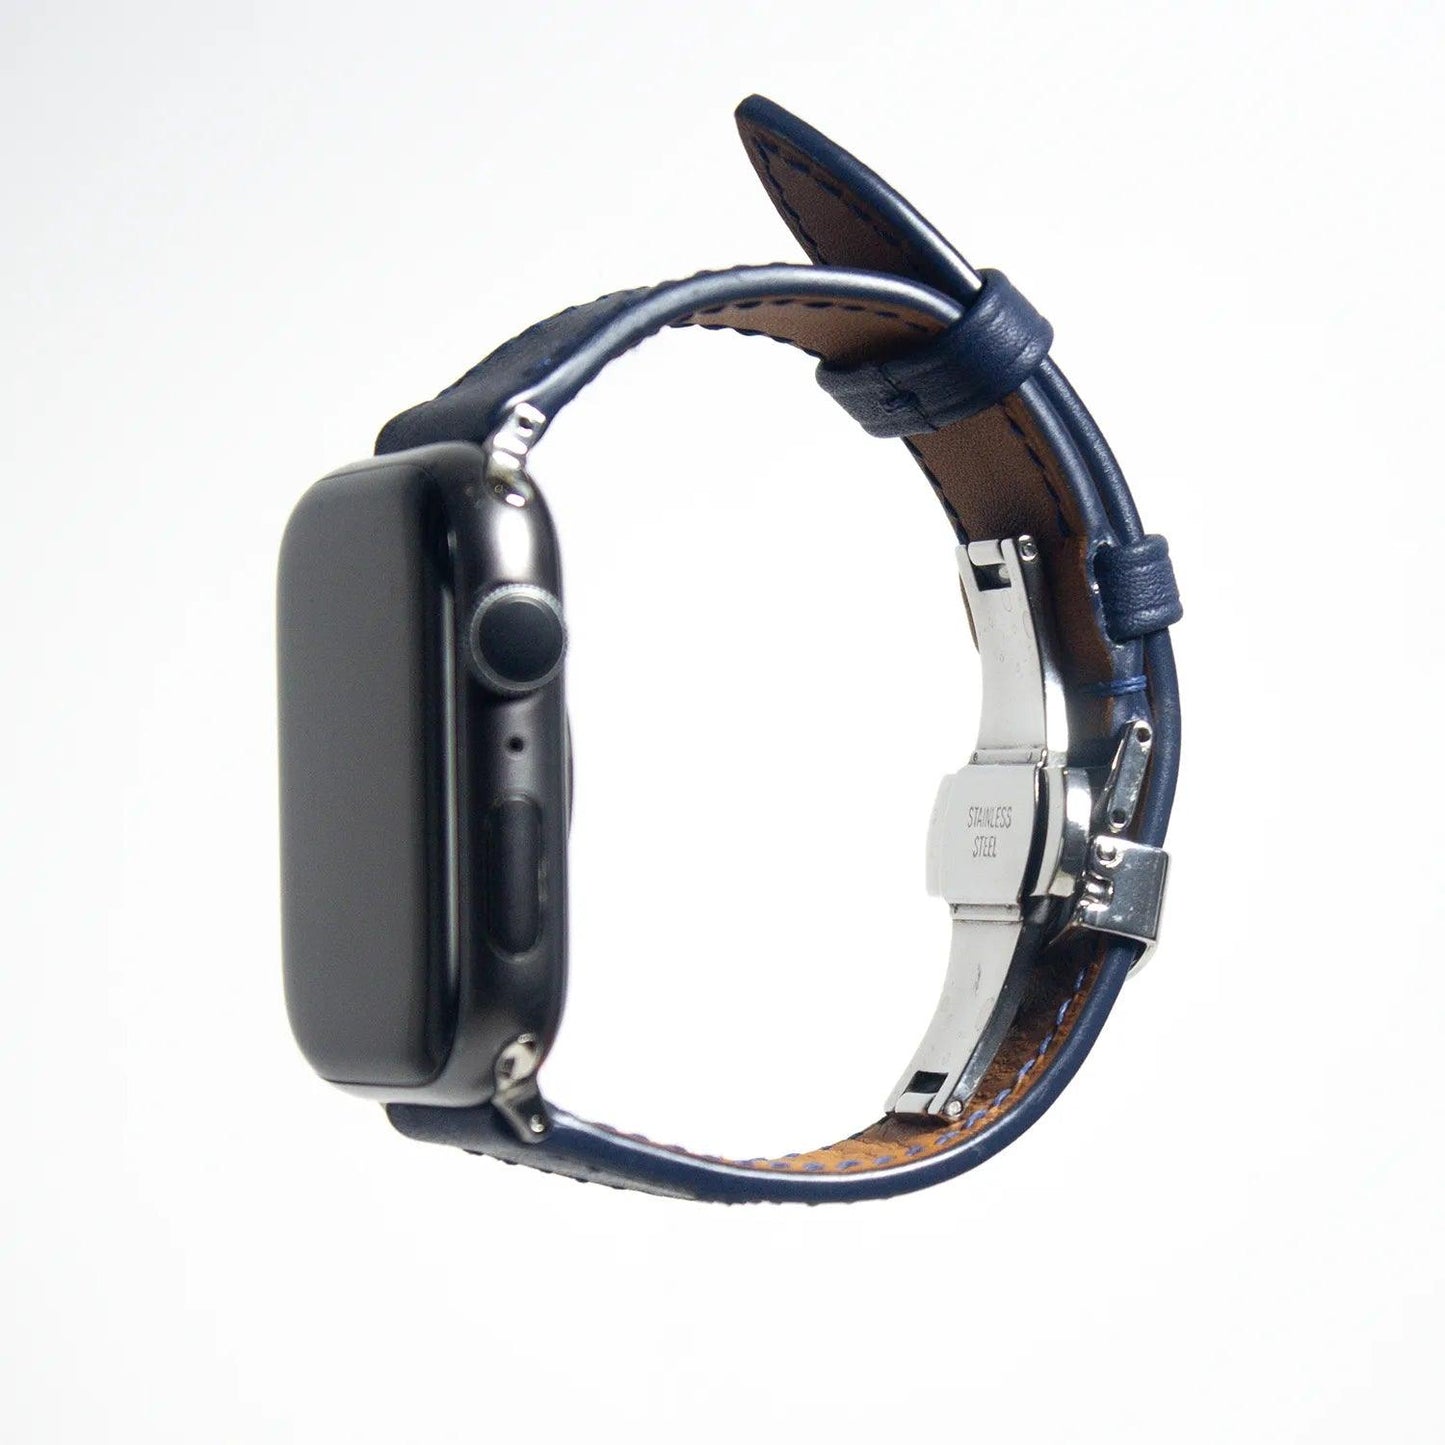 Sophisticated apple watch leather band crafted from navy blue Swift leather, exemplifying classic elegance.